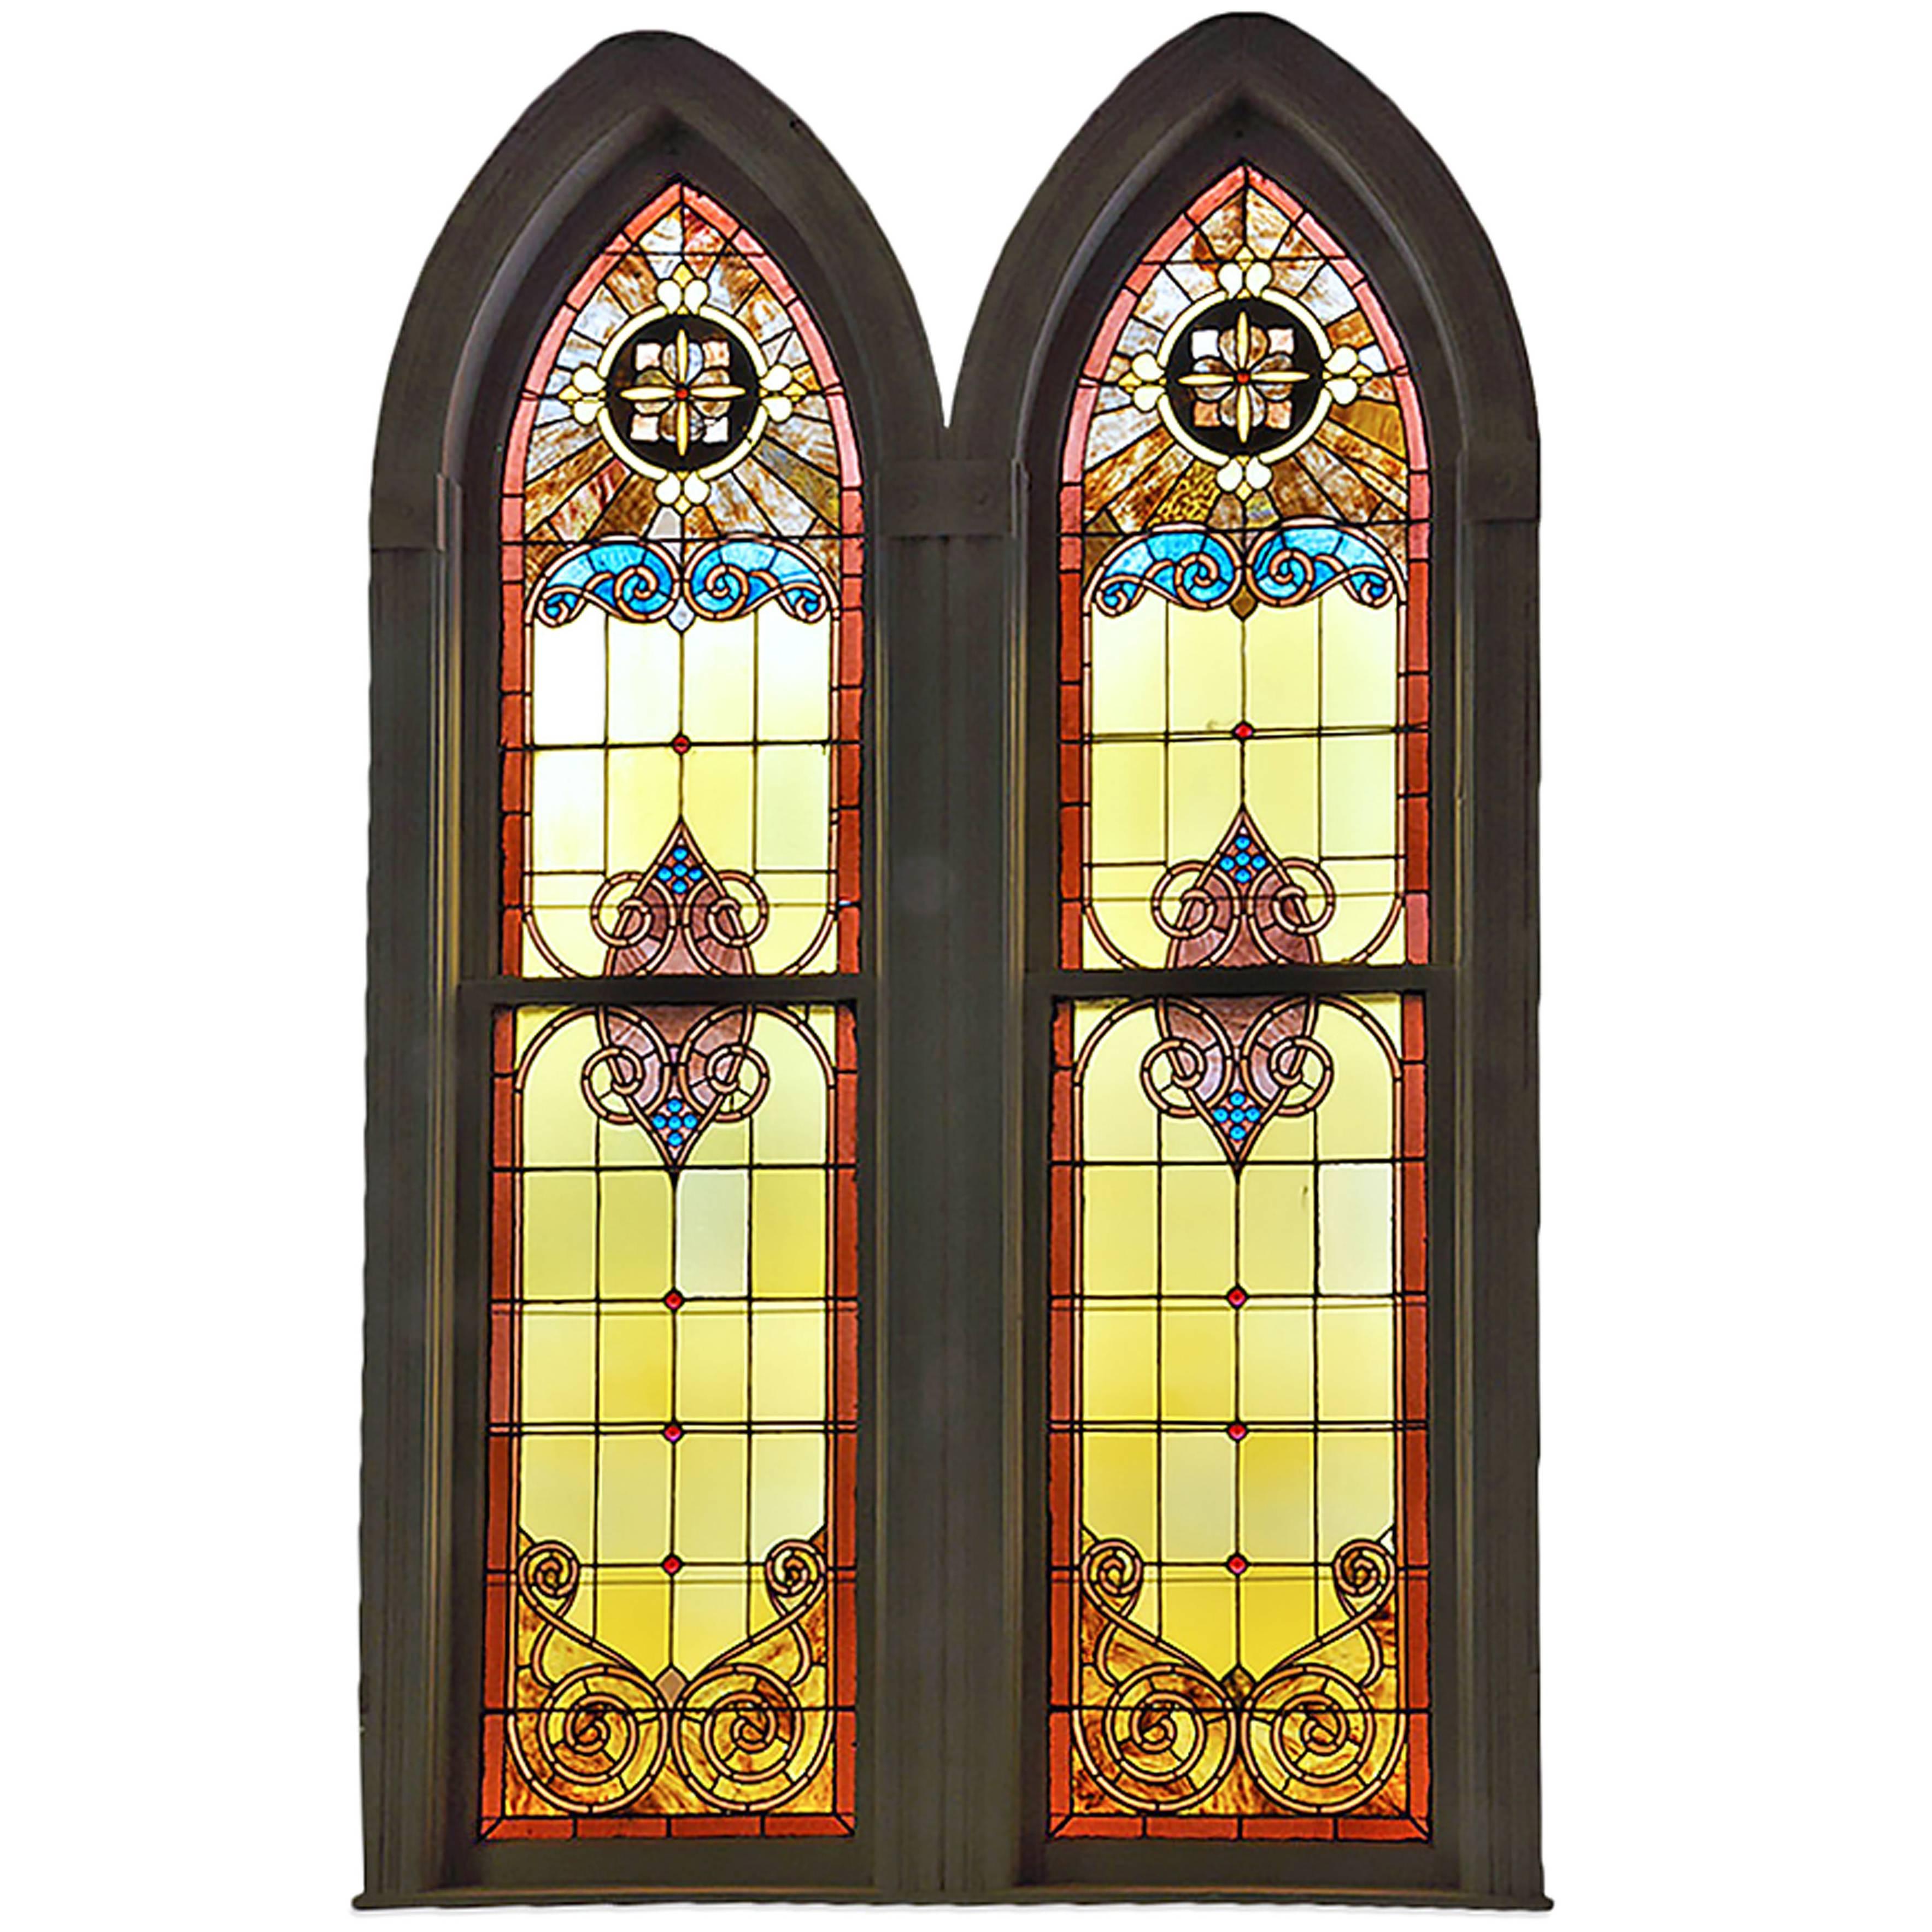 Large Arched Stained Glass Church Window - Two Available